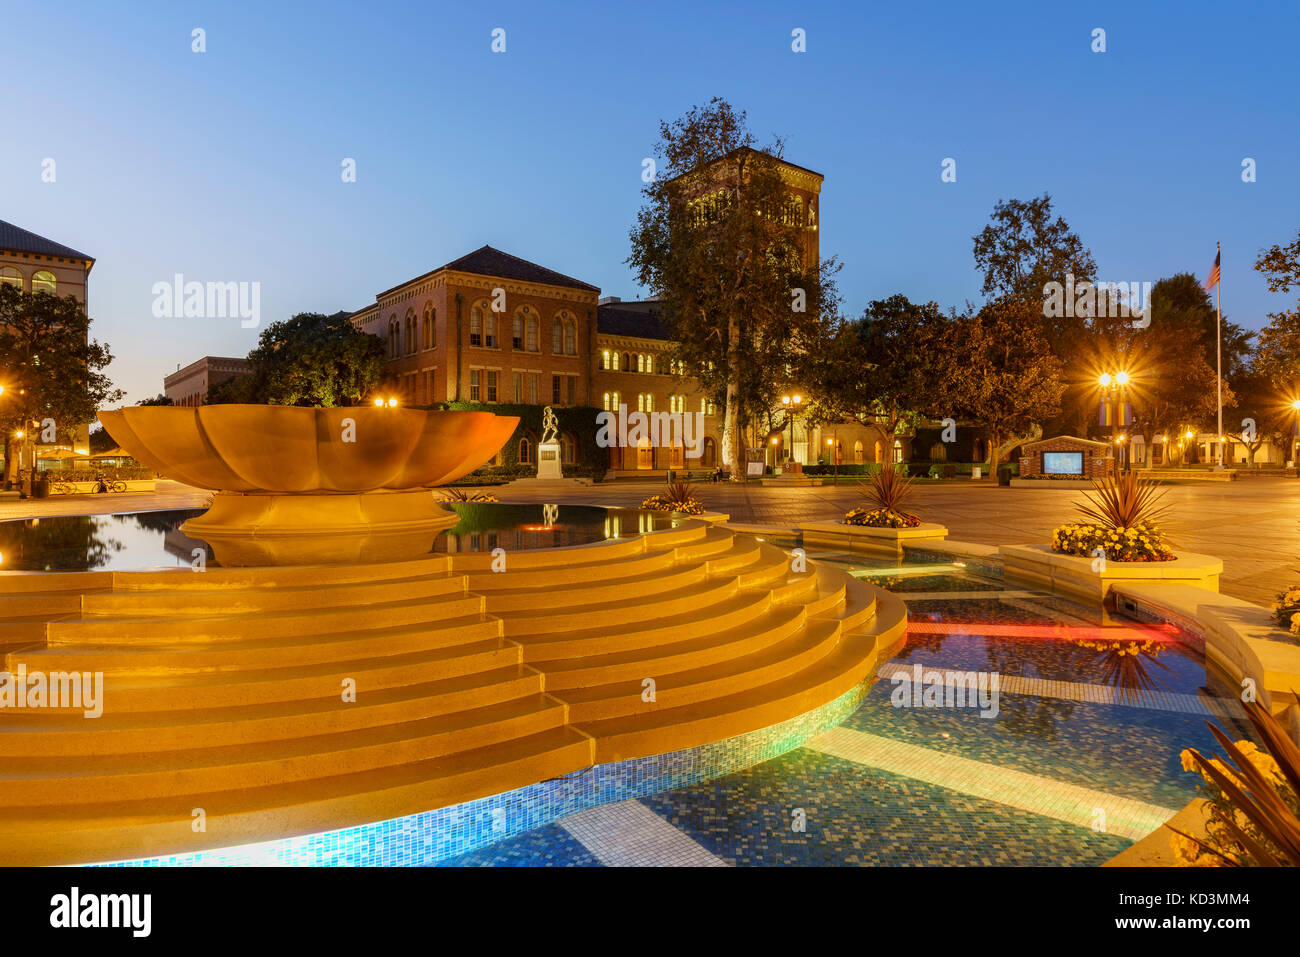 Los Angeles, OCT 8: Night view of the beautiful fountain and Bovard Auditorium on OCT 8, 2017 at University of Southern California, Los Angeles, CA Stock Photo